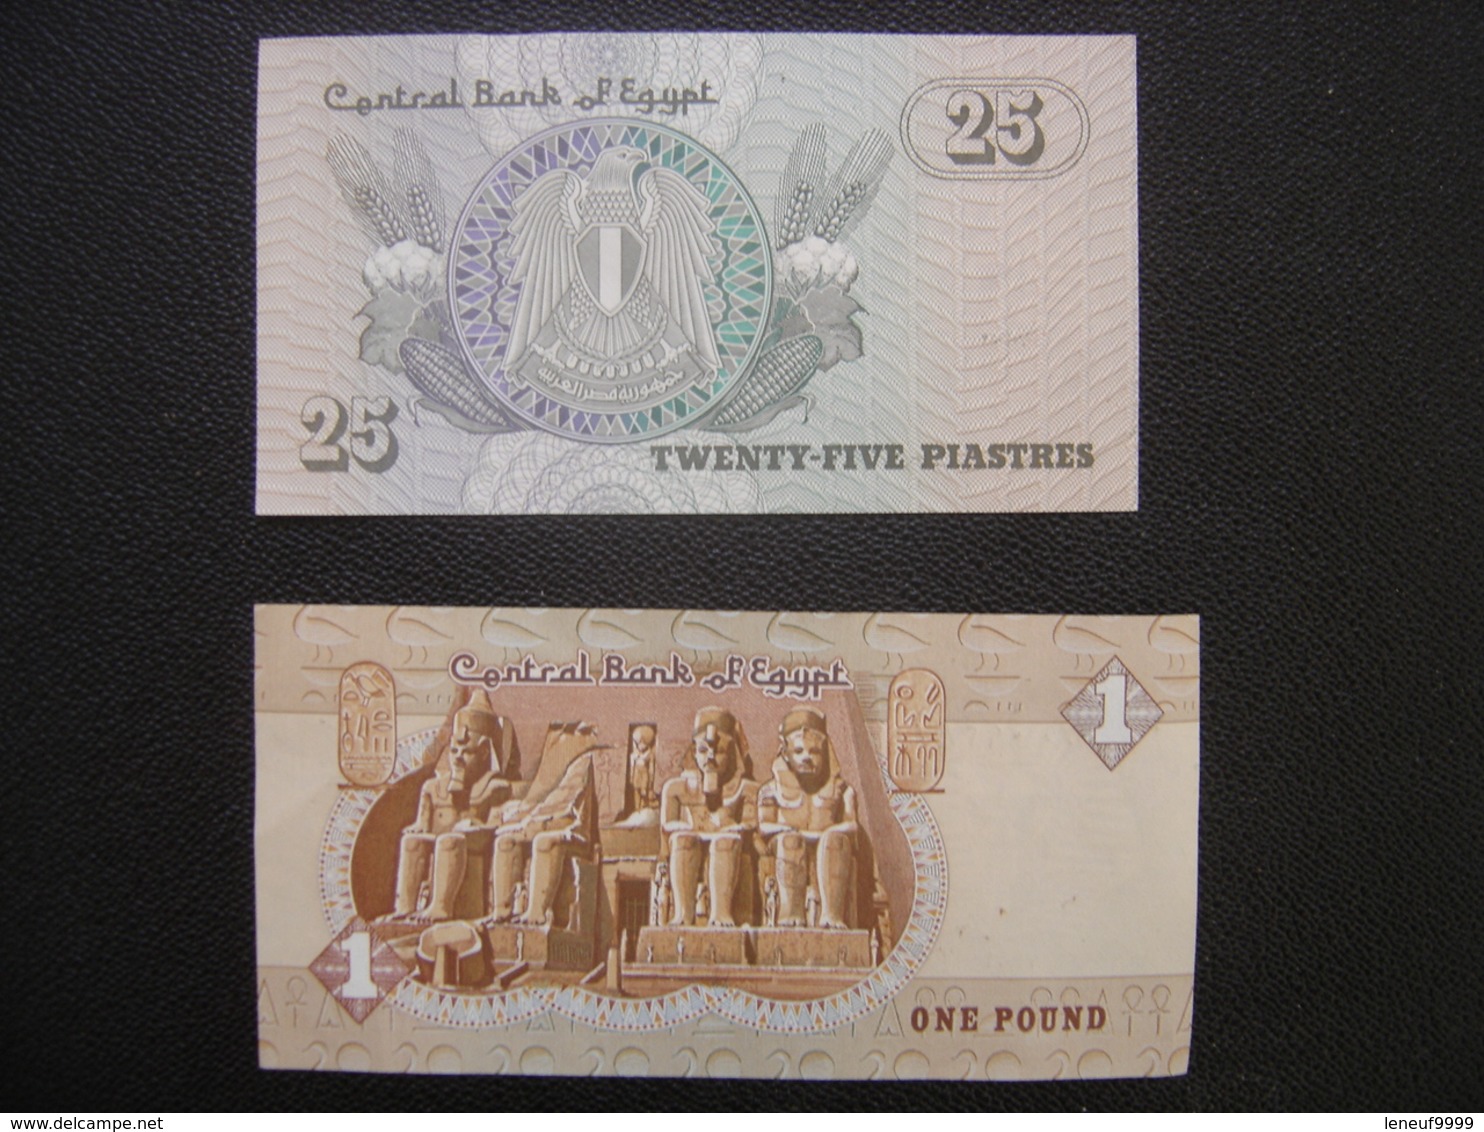 Billet EGYPTE 2 CENTRAL BANK OF EGYPT 25 PIASTRES ONE POUND - South Africa